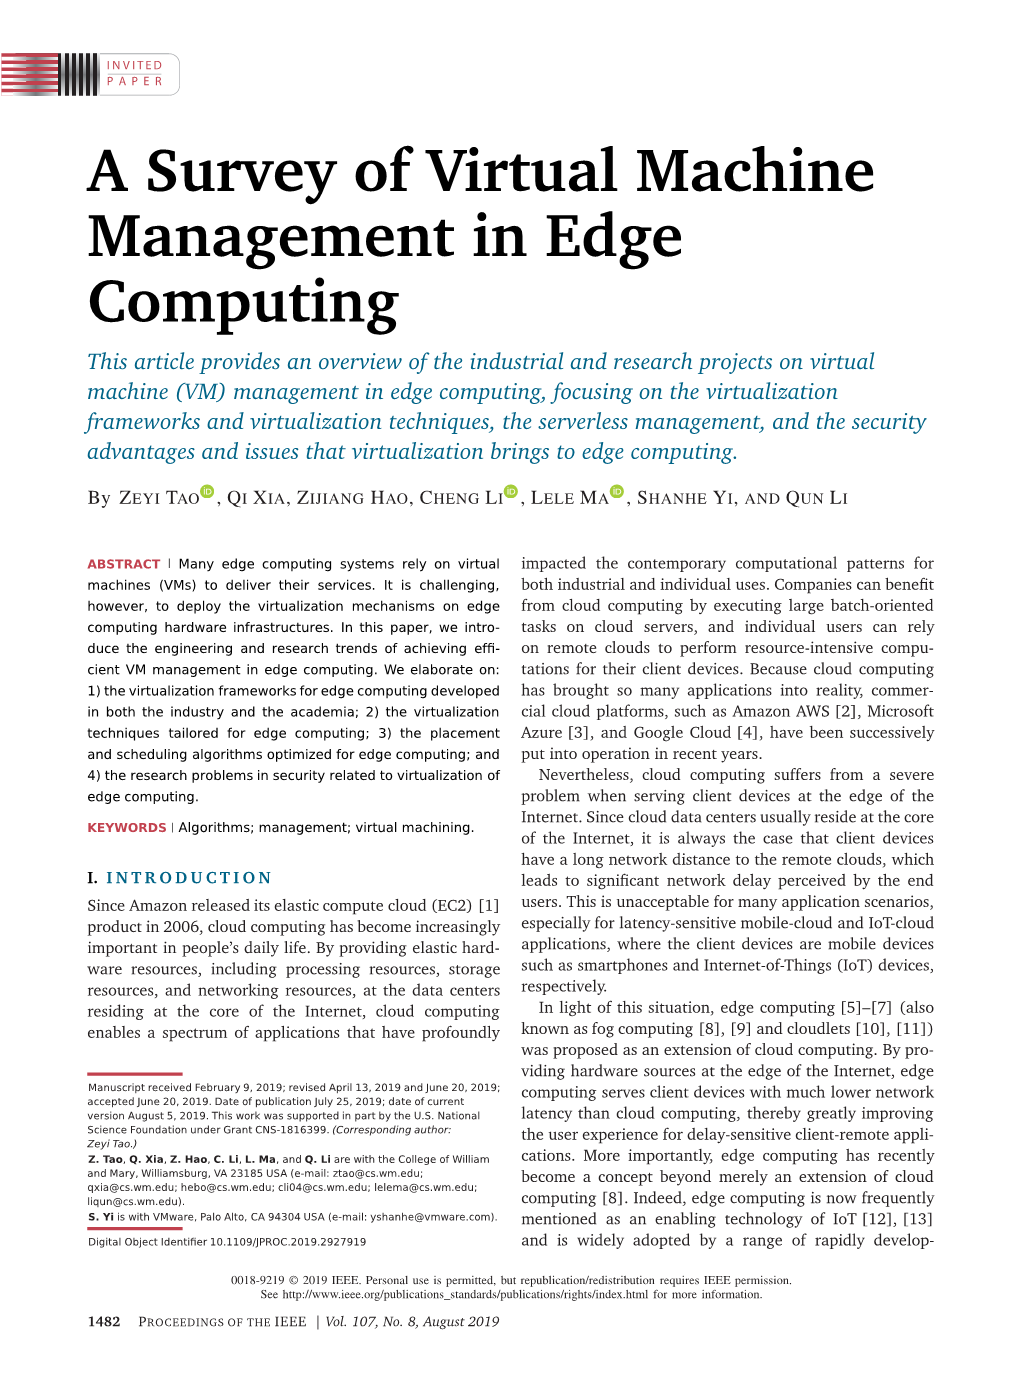 A Survey of Virtual Machine Management in Edge Computing